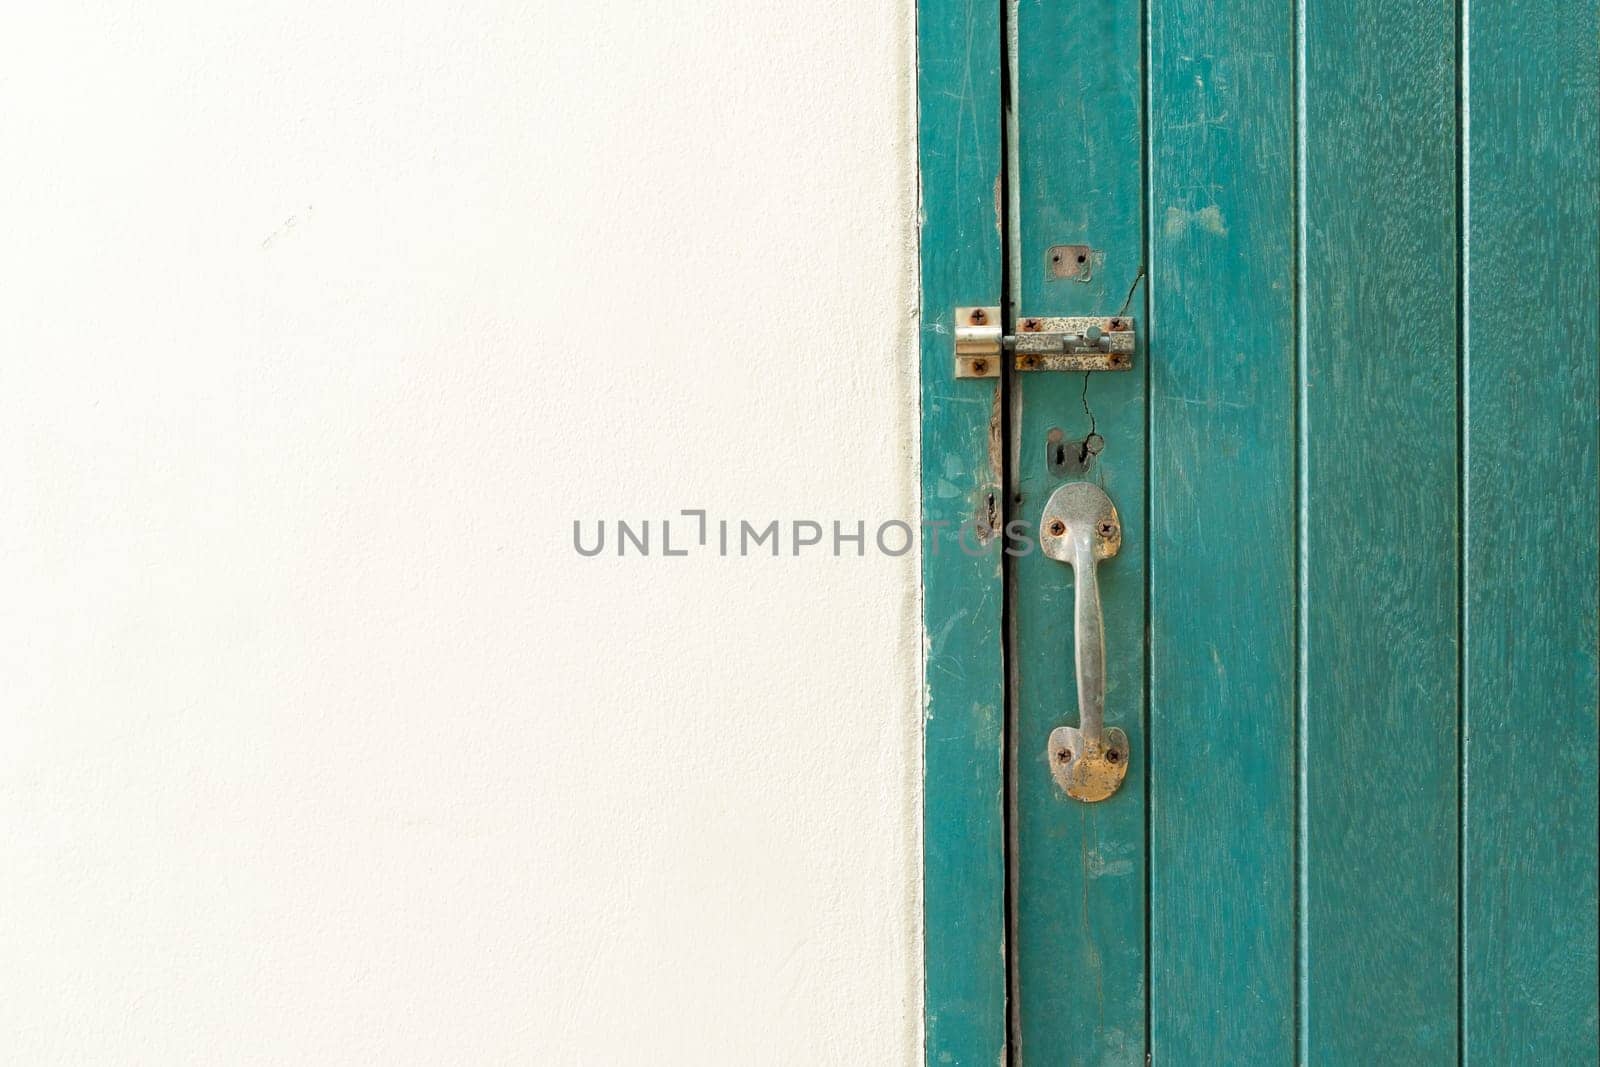 Closed padlock hangs on the green color wooden door and wall.